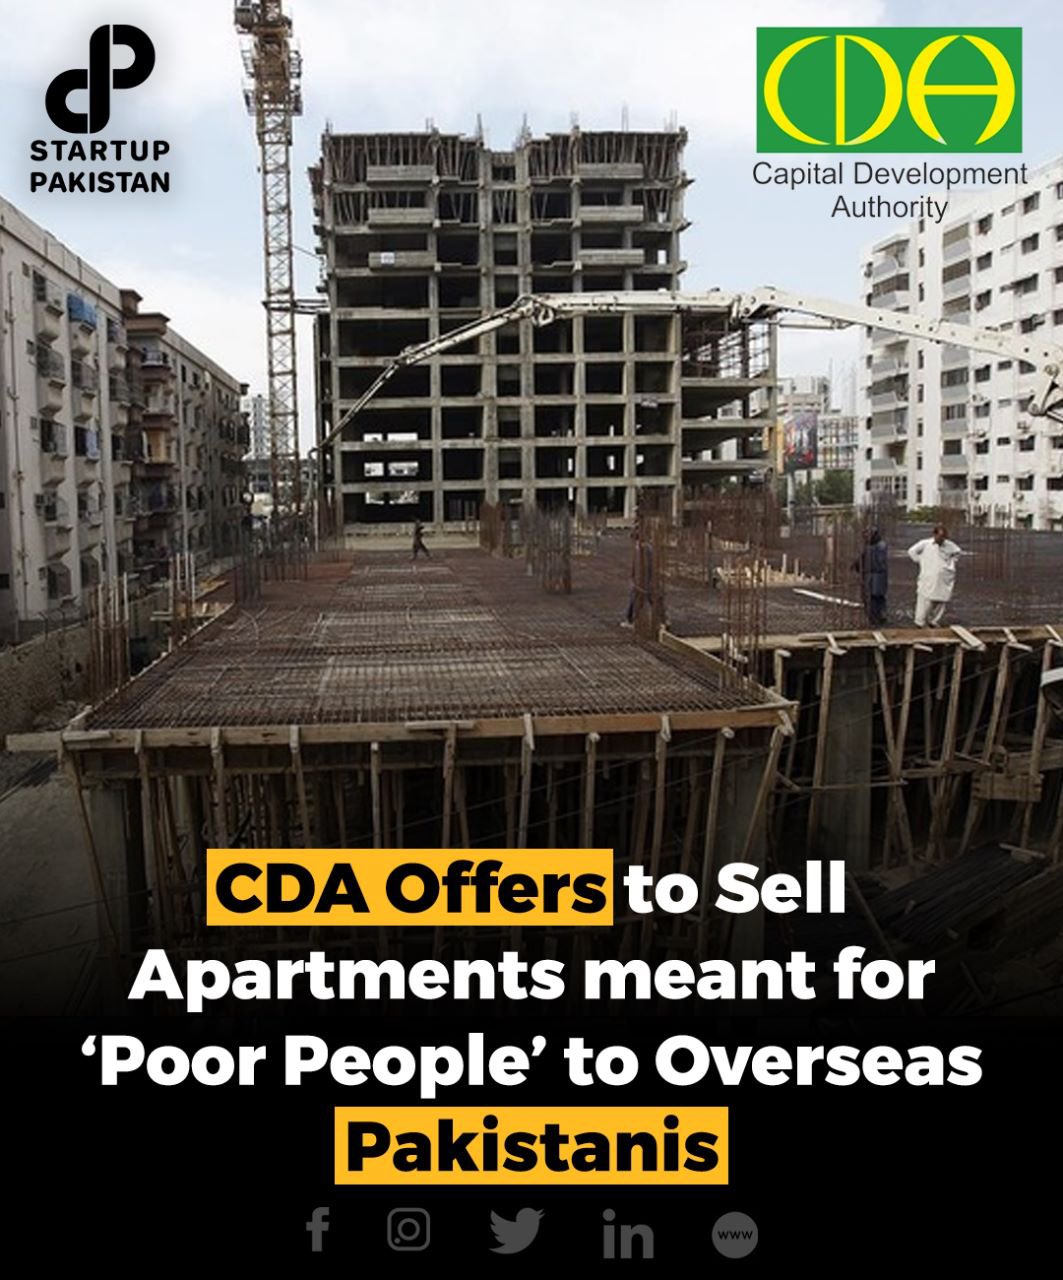 A graphic, being shared online, with claims that apartments launched by Imran Khan for low-income families are being sold to overseas Pakistanis.